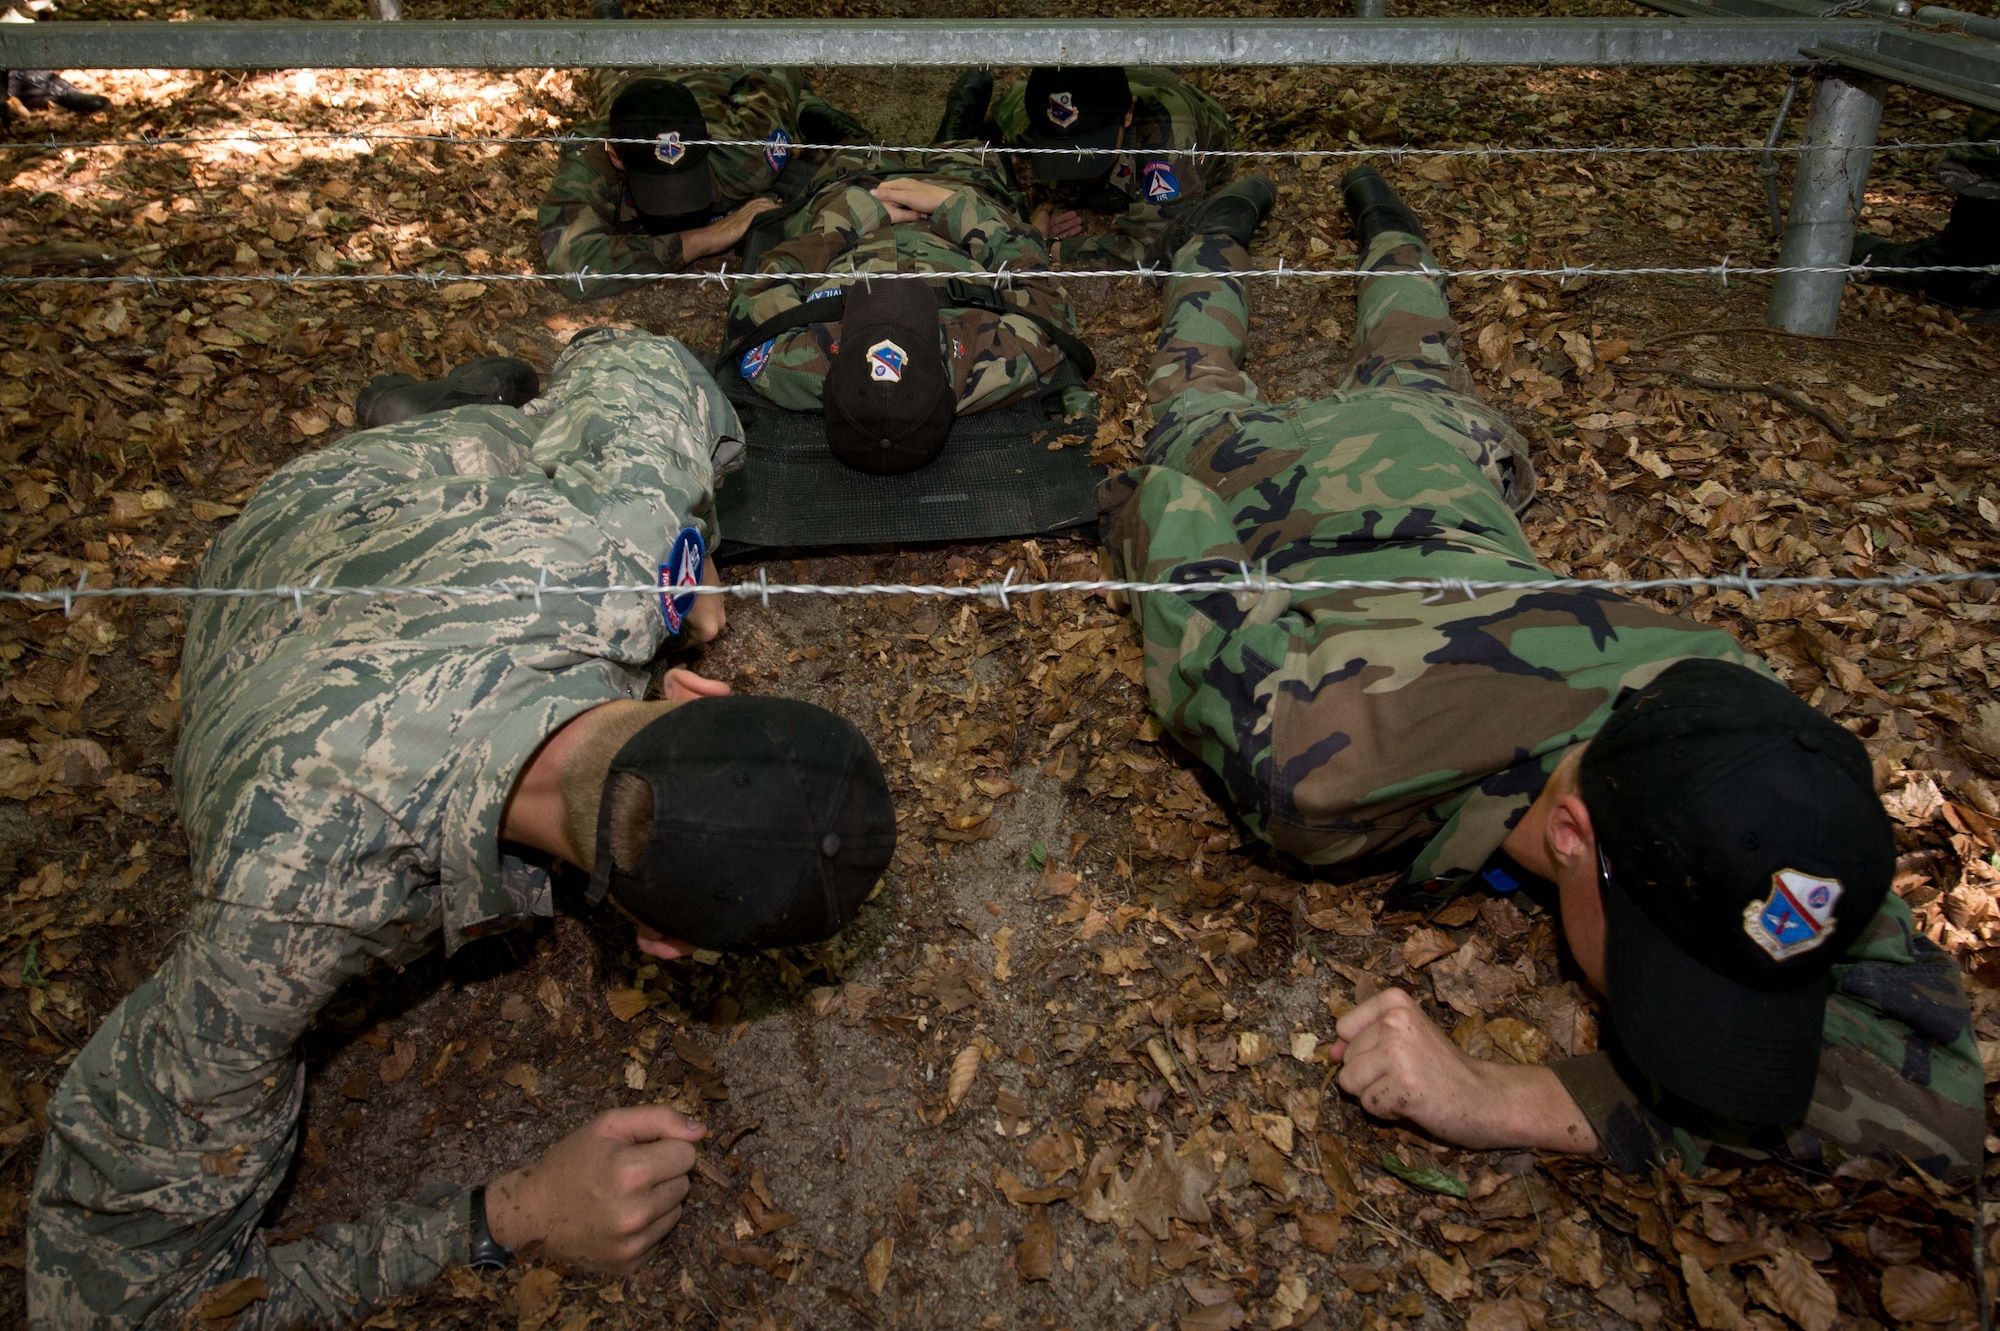 Cadets with the Civil Air Patrol European Encampment pull a simulated patient under barbed wire on a woodland obstacle course on Ramstein Air Base, Germany, June 21, 2017. The encampment curriculum encompasses four core areas: aerospace education, leadership development, character development, and physical fitness. The curriculum designed, in part, to prepare cadets for a possible military aerospace career. (U.S. Air Force photo by Senior Airman Elizabeth Baker)